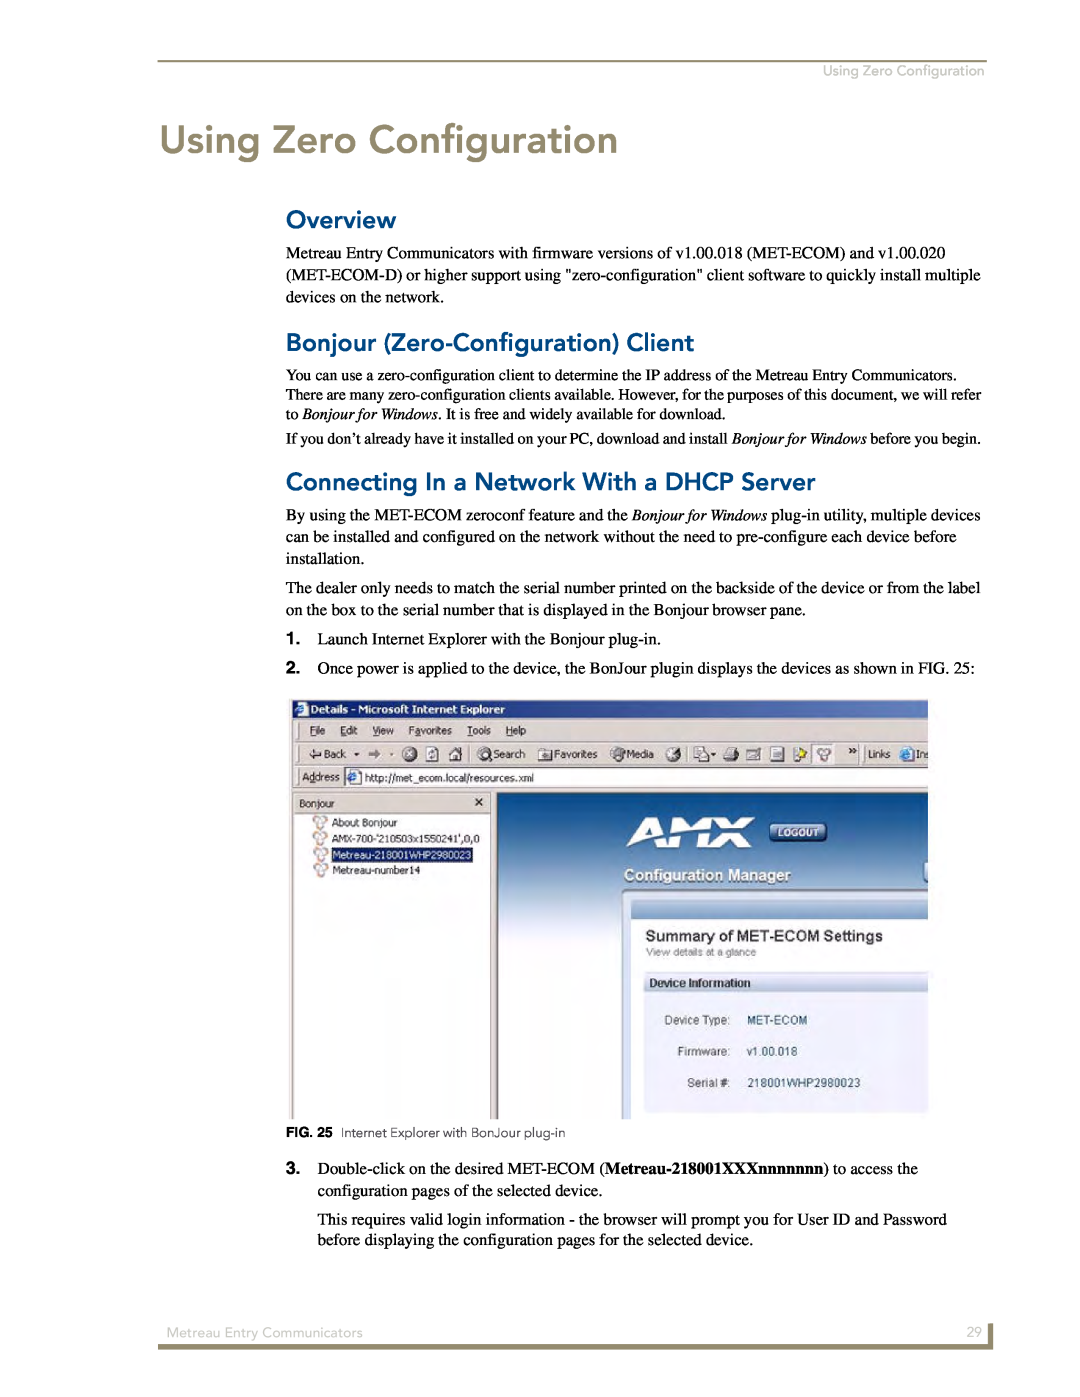 AMX MET-ECOM-D Using Zero Configuration, Bonjour Zero-ConfigurationClient, Connecting In a Network With a DHCP Server 